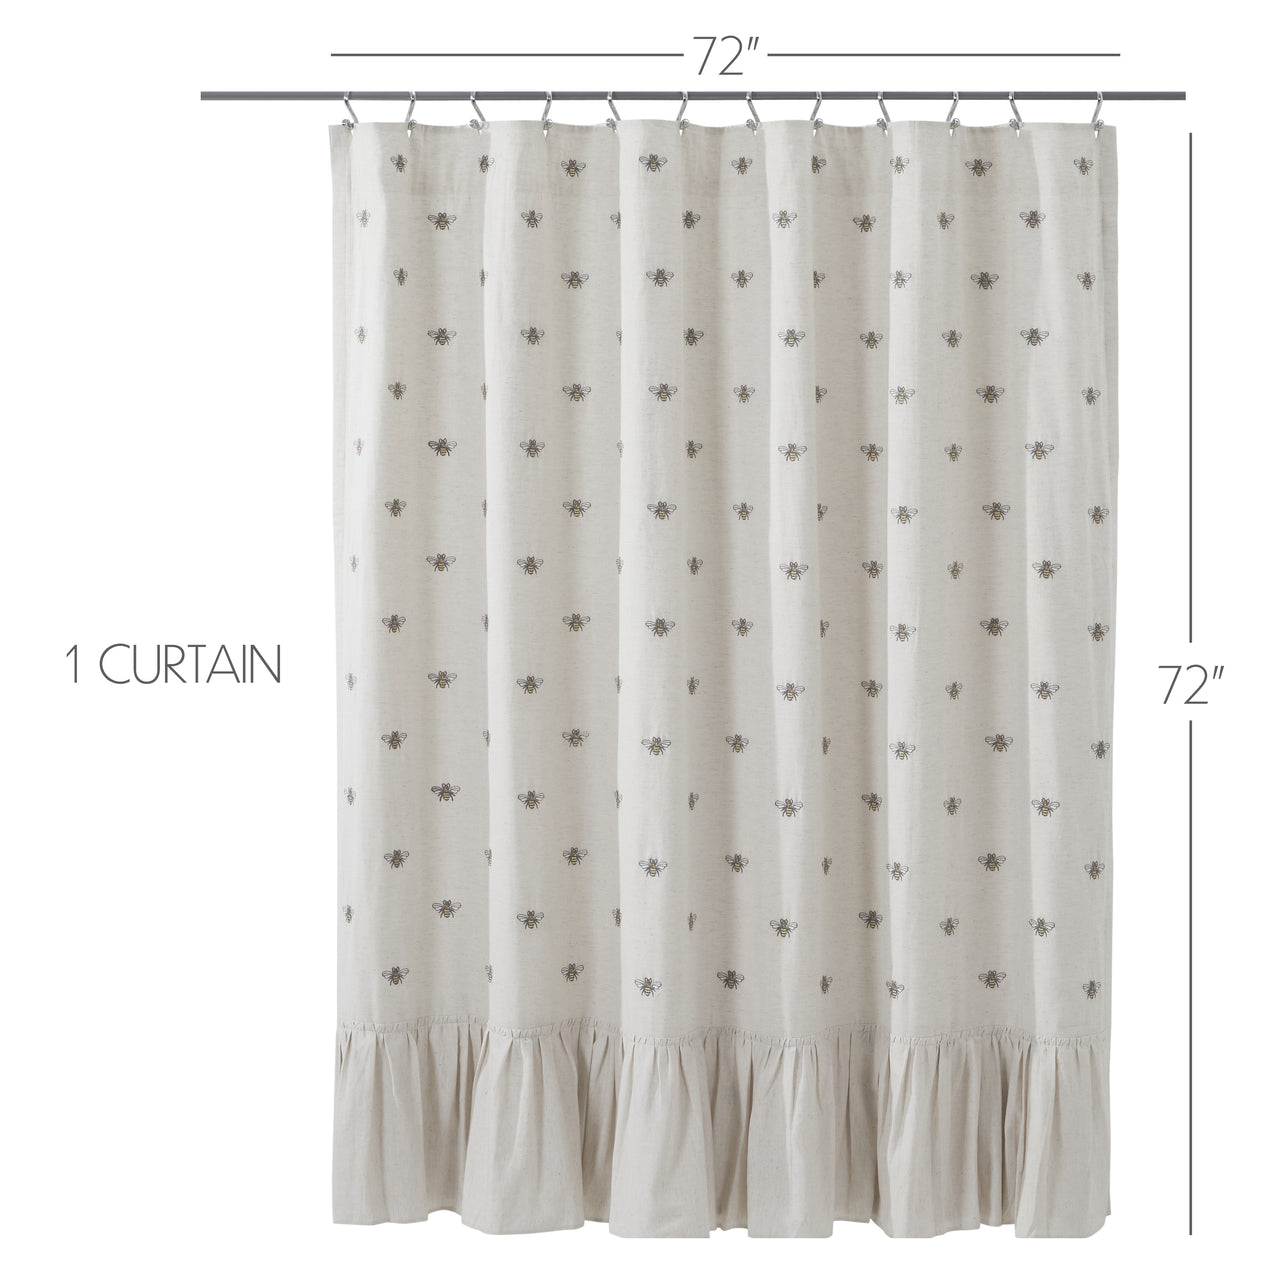 Embroidered Bee Shower Curtain 72x72 VHC Brands